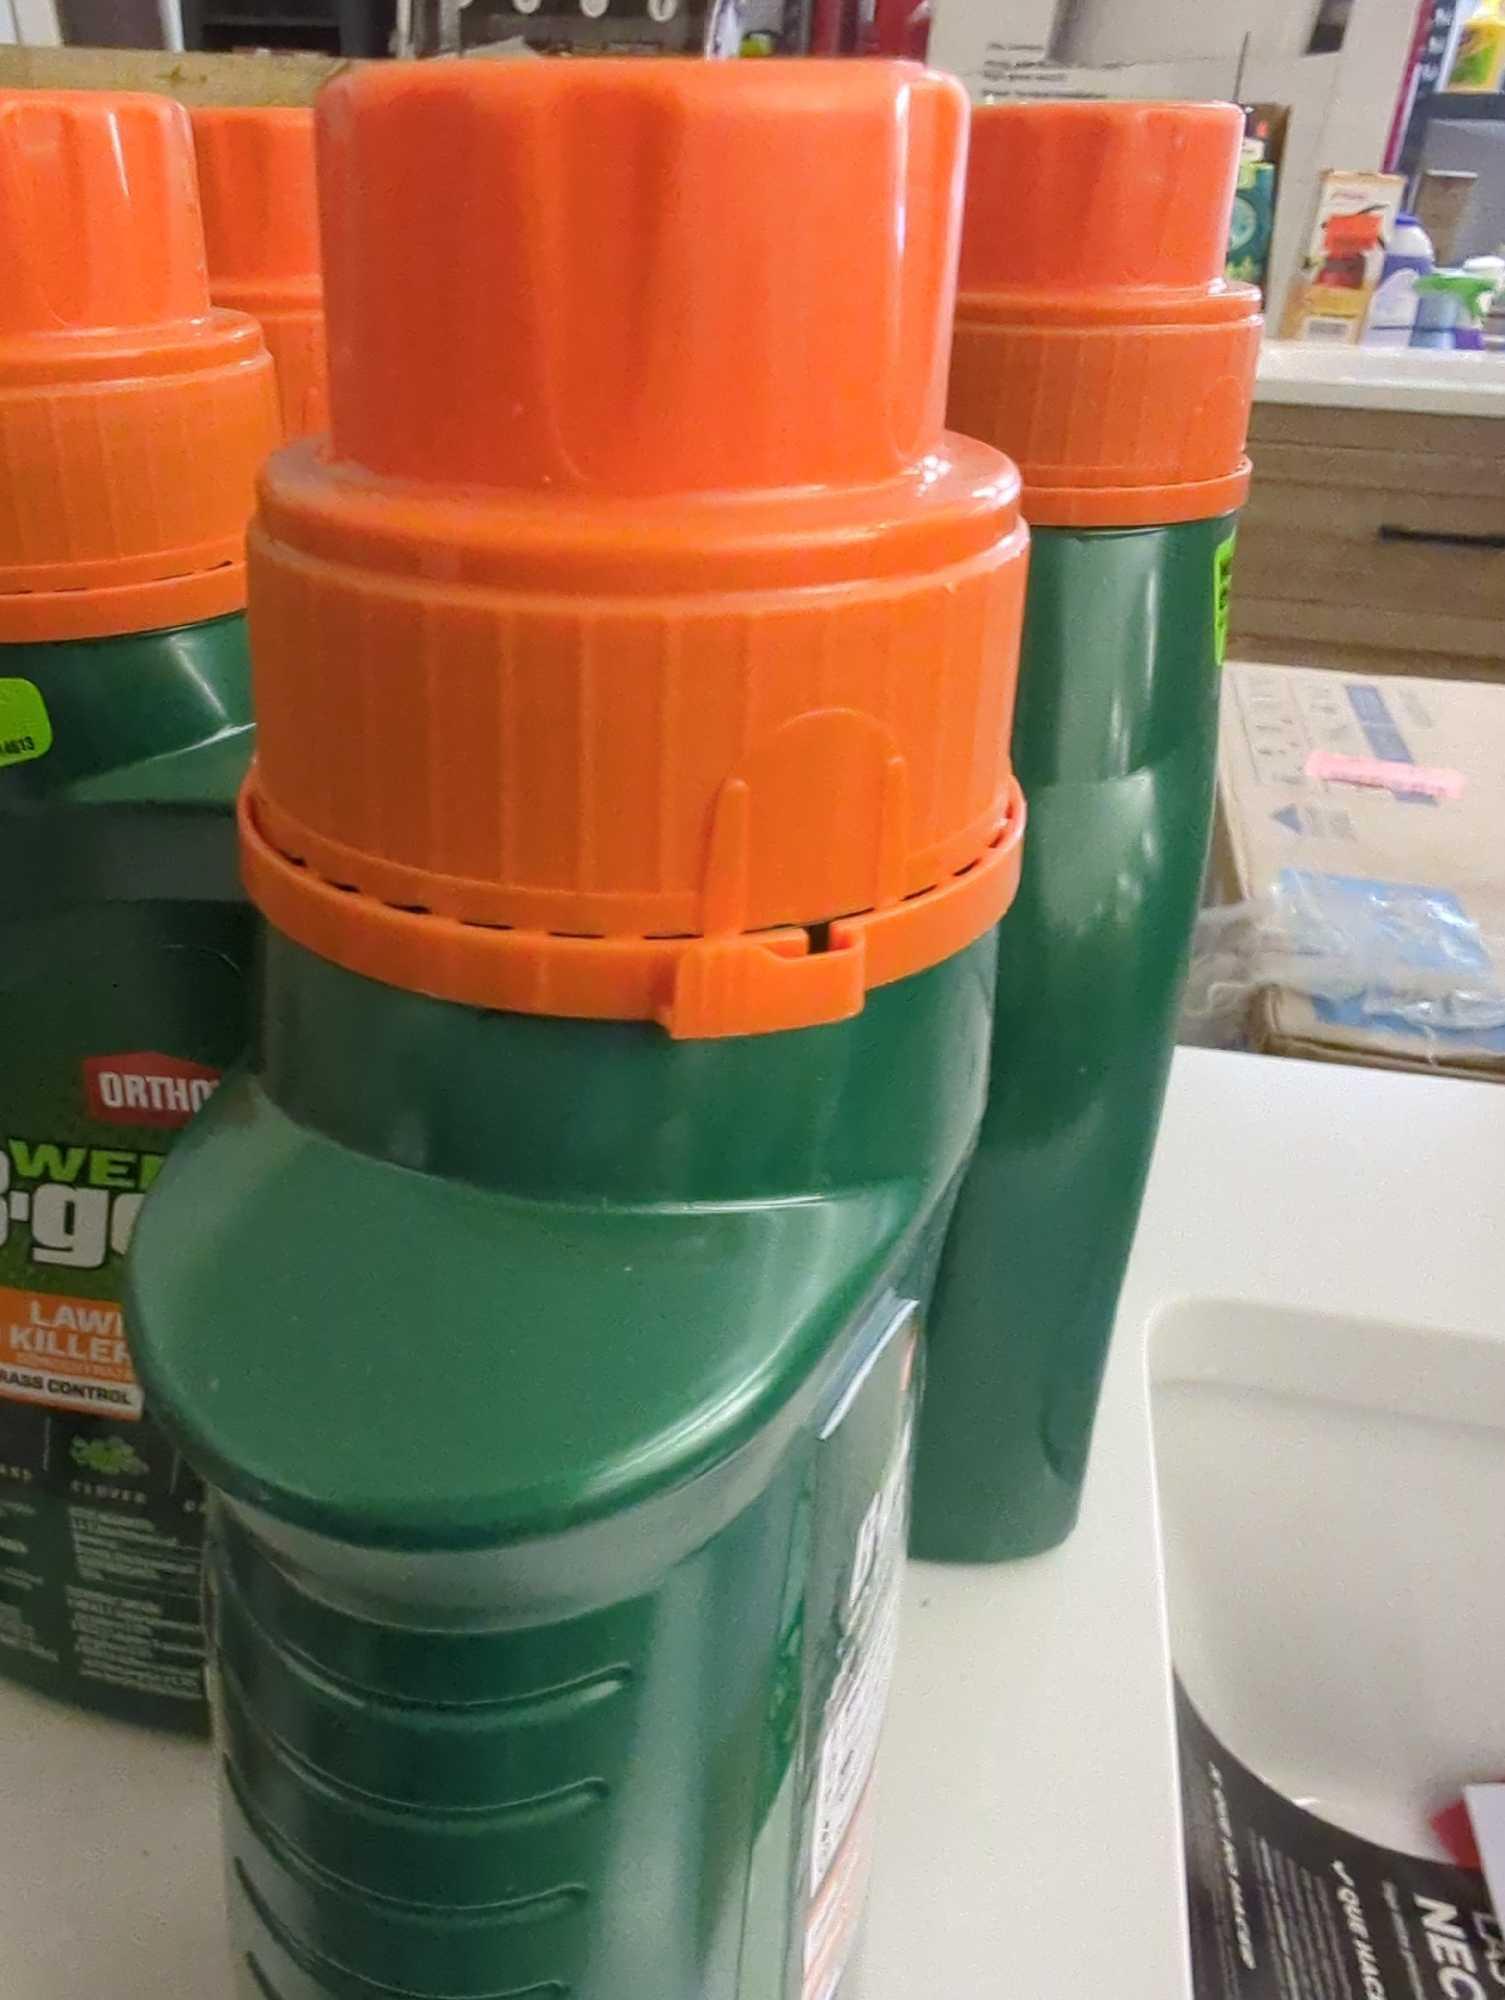 Lot of 8 Bottles of Ortho 32 oz. Weed B Gon Plus Crabgrass Control Concentrate, Appears to be New in